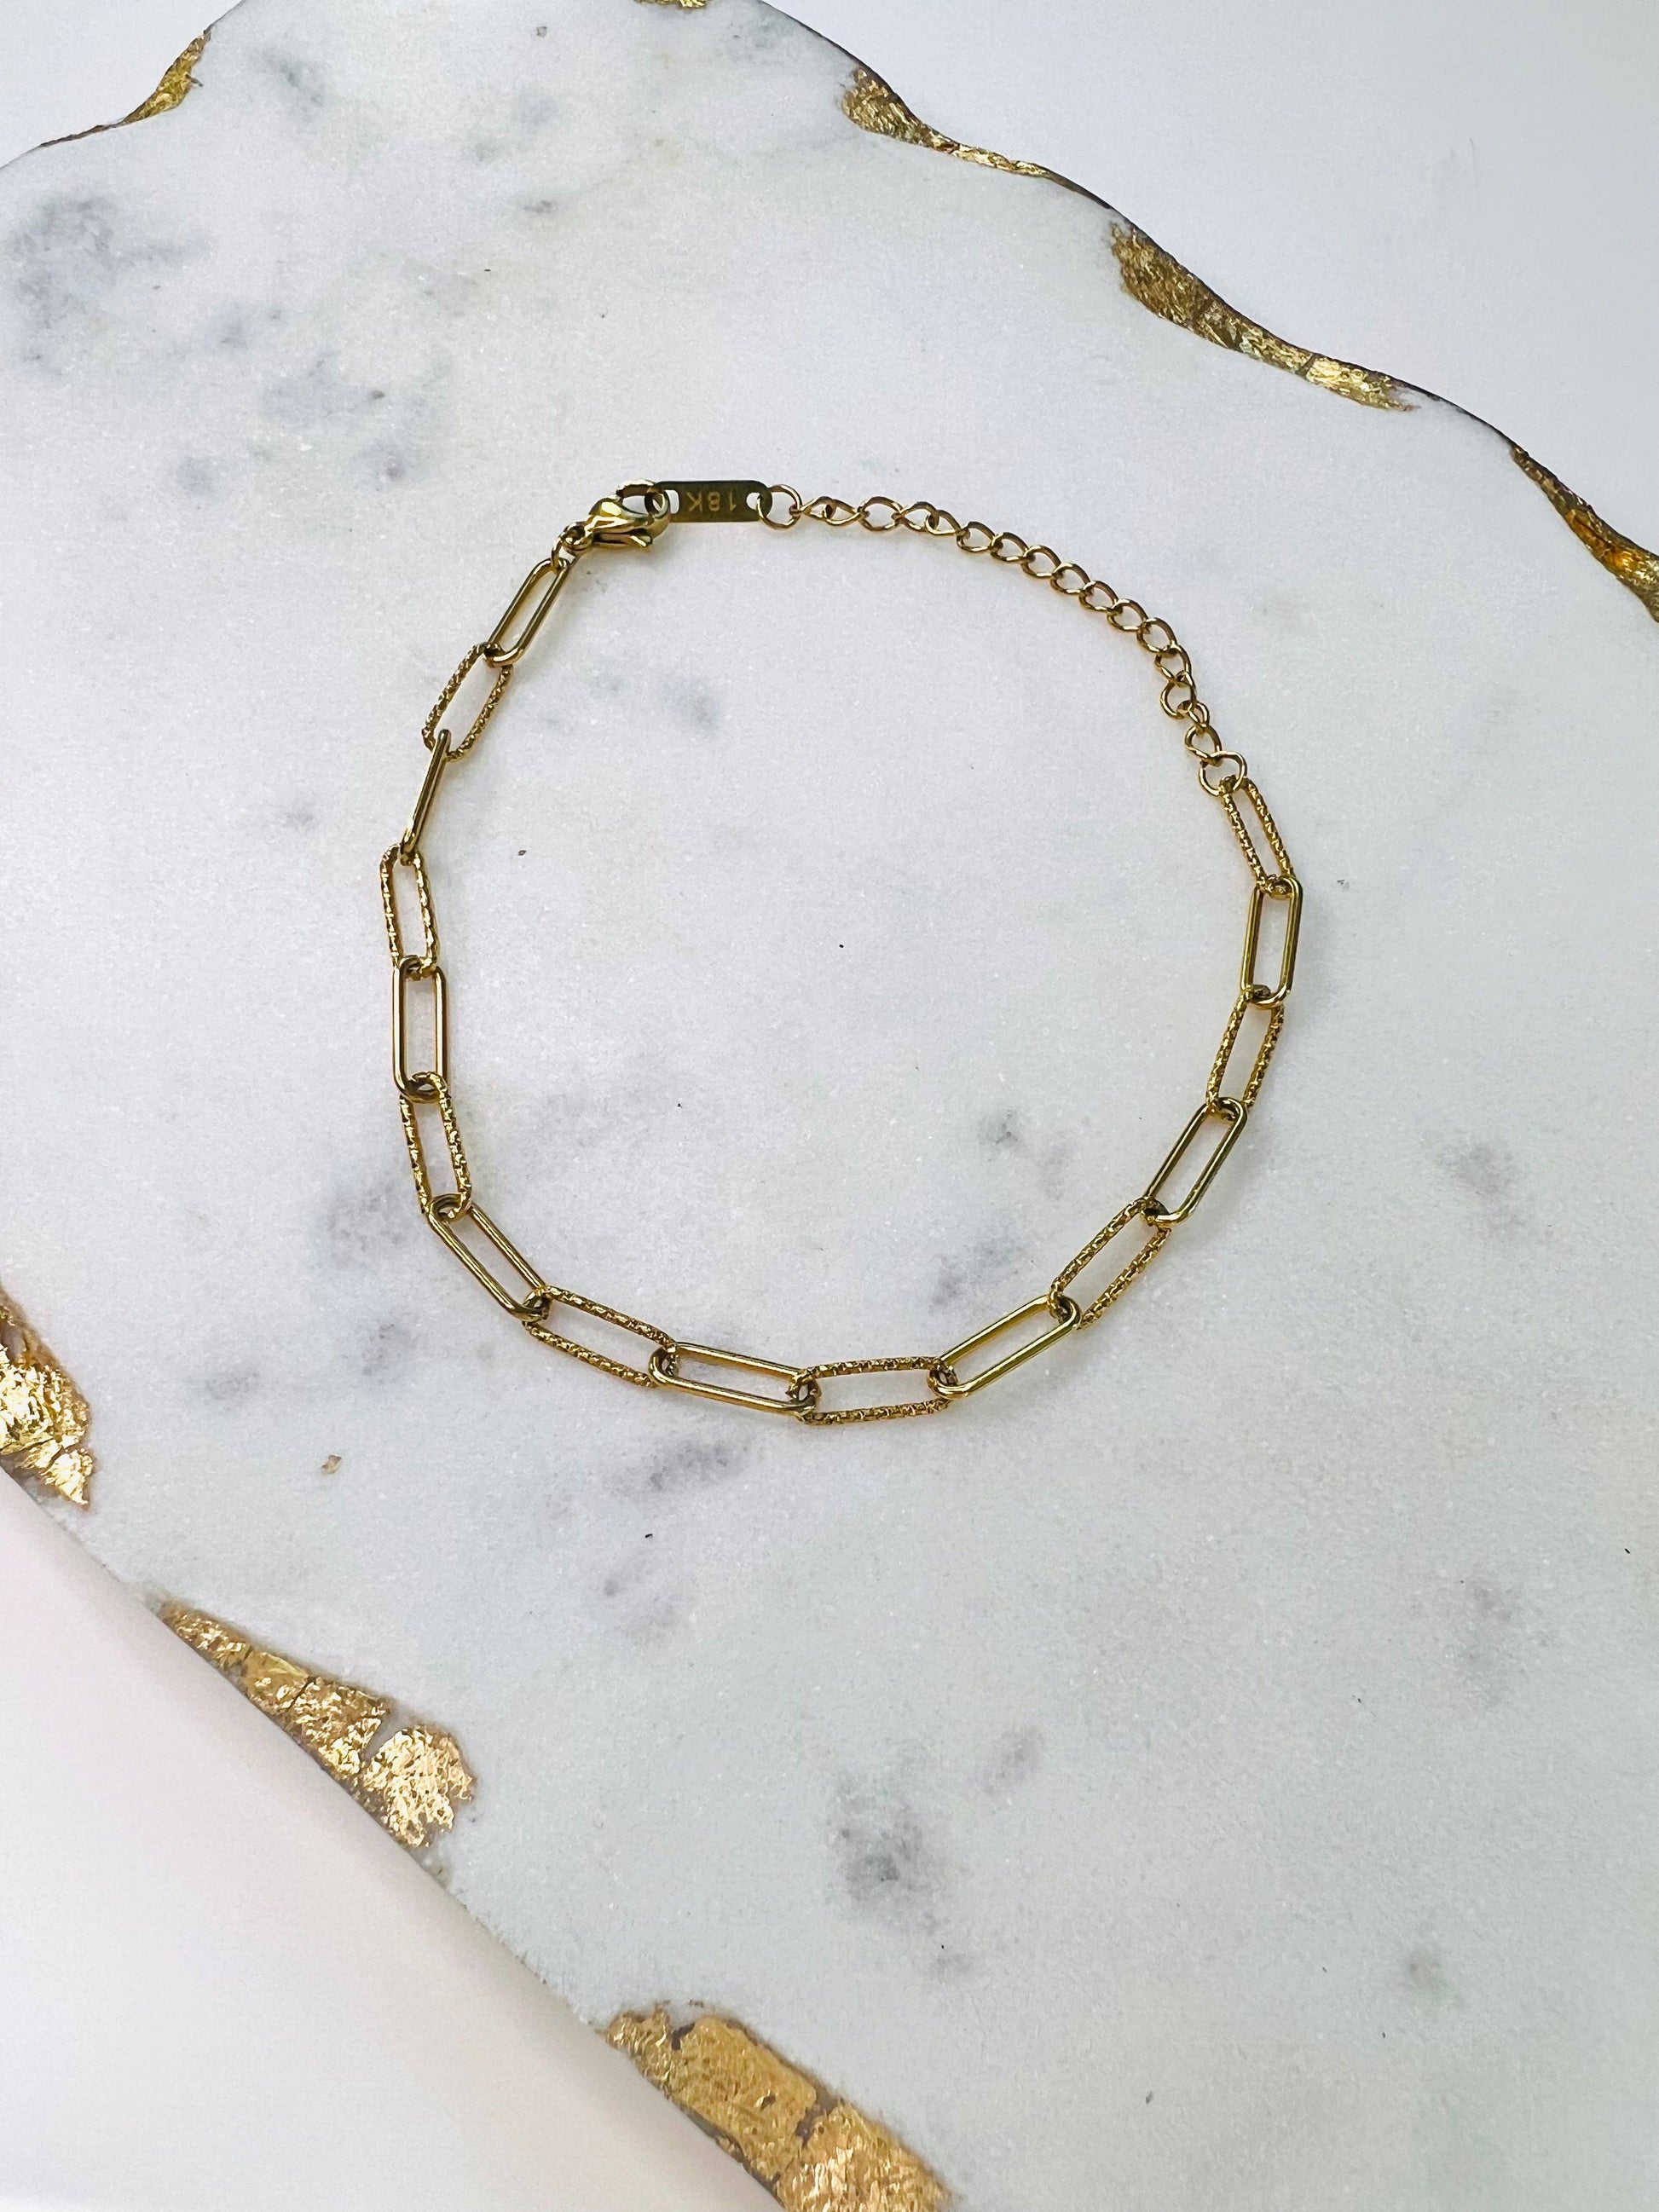 An Alex Link Bracelet by Lacey Rae Jewelry on a marble table.